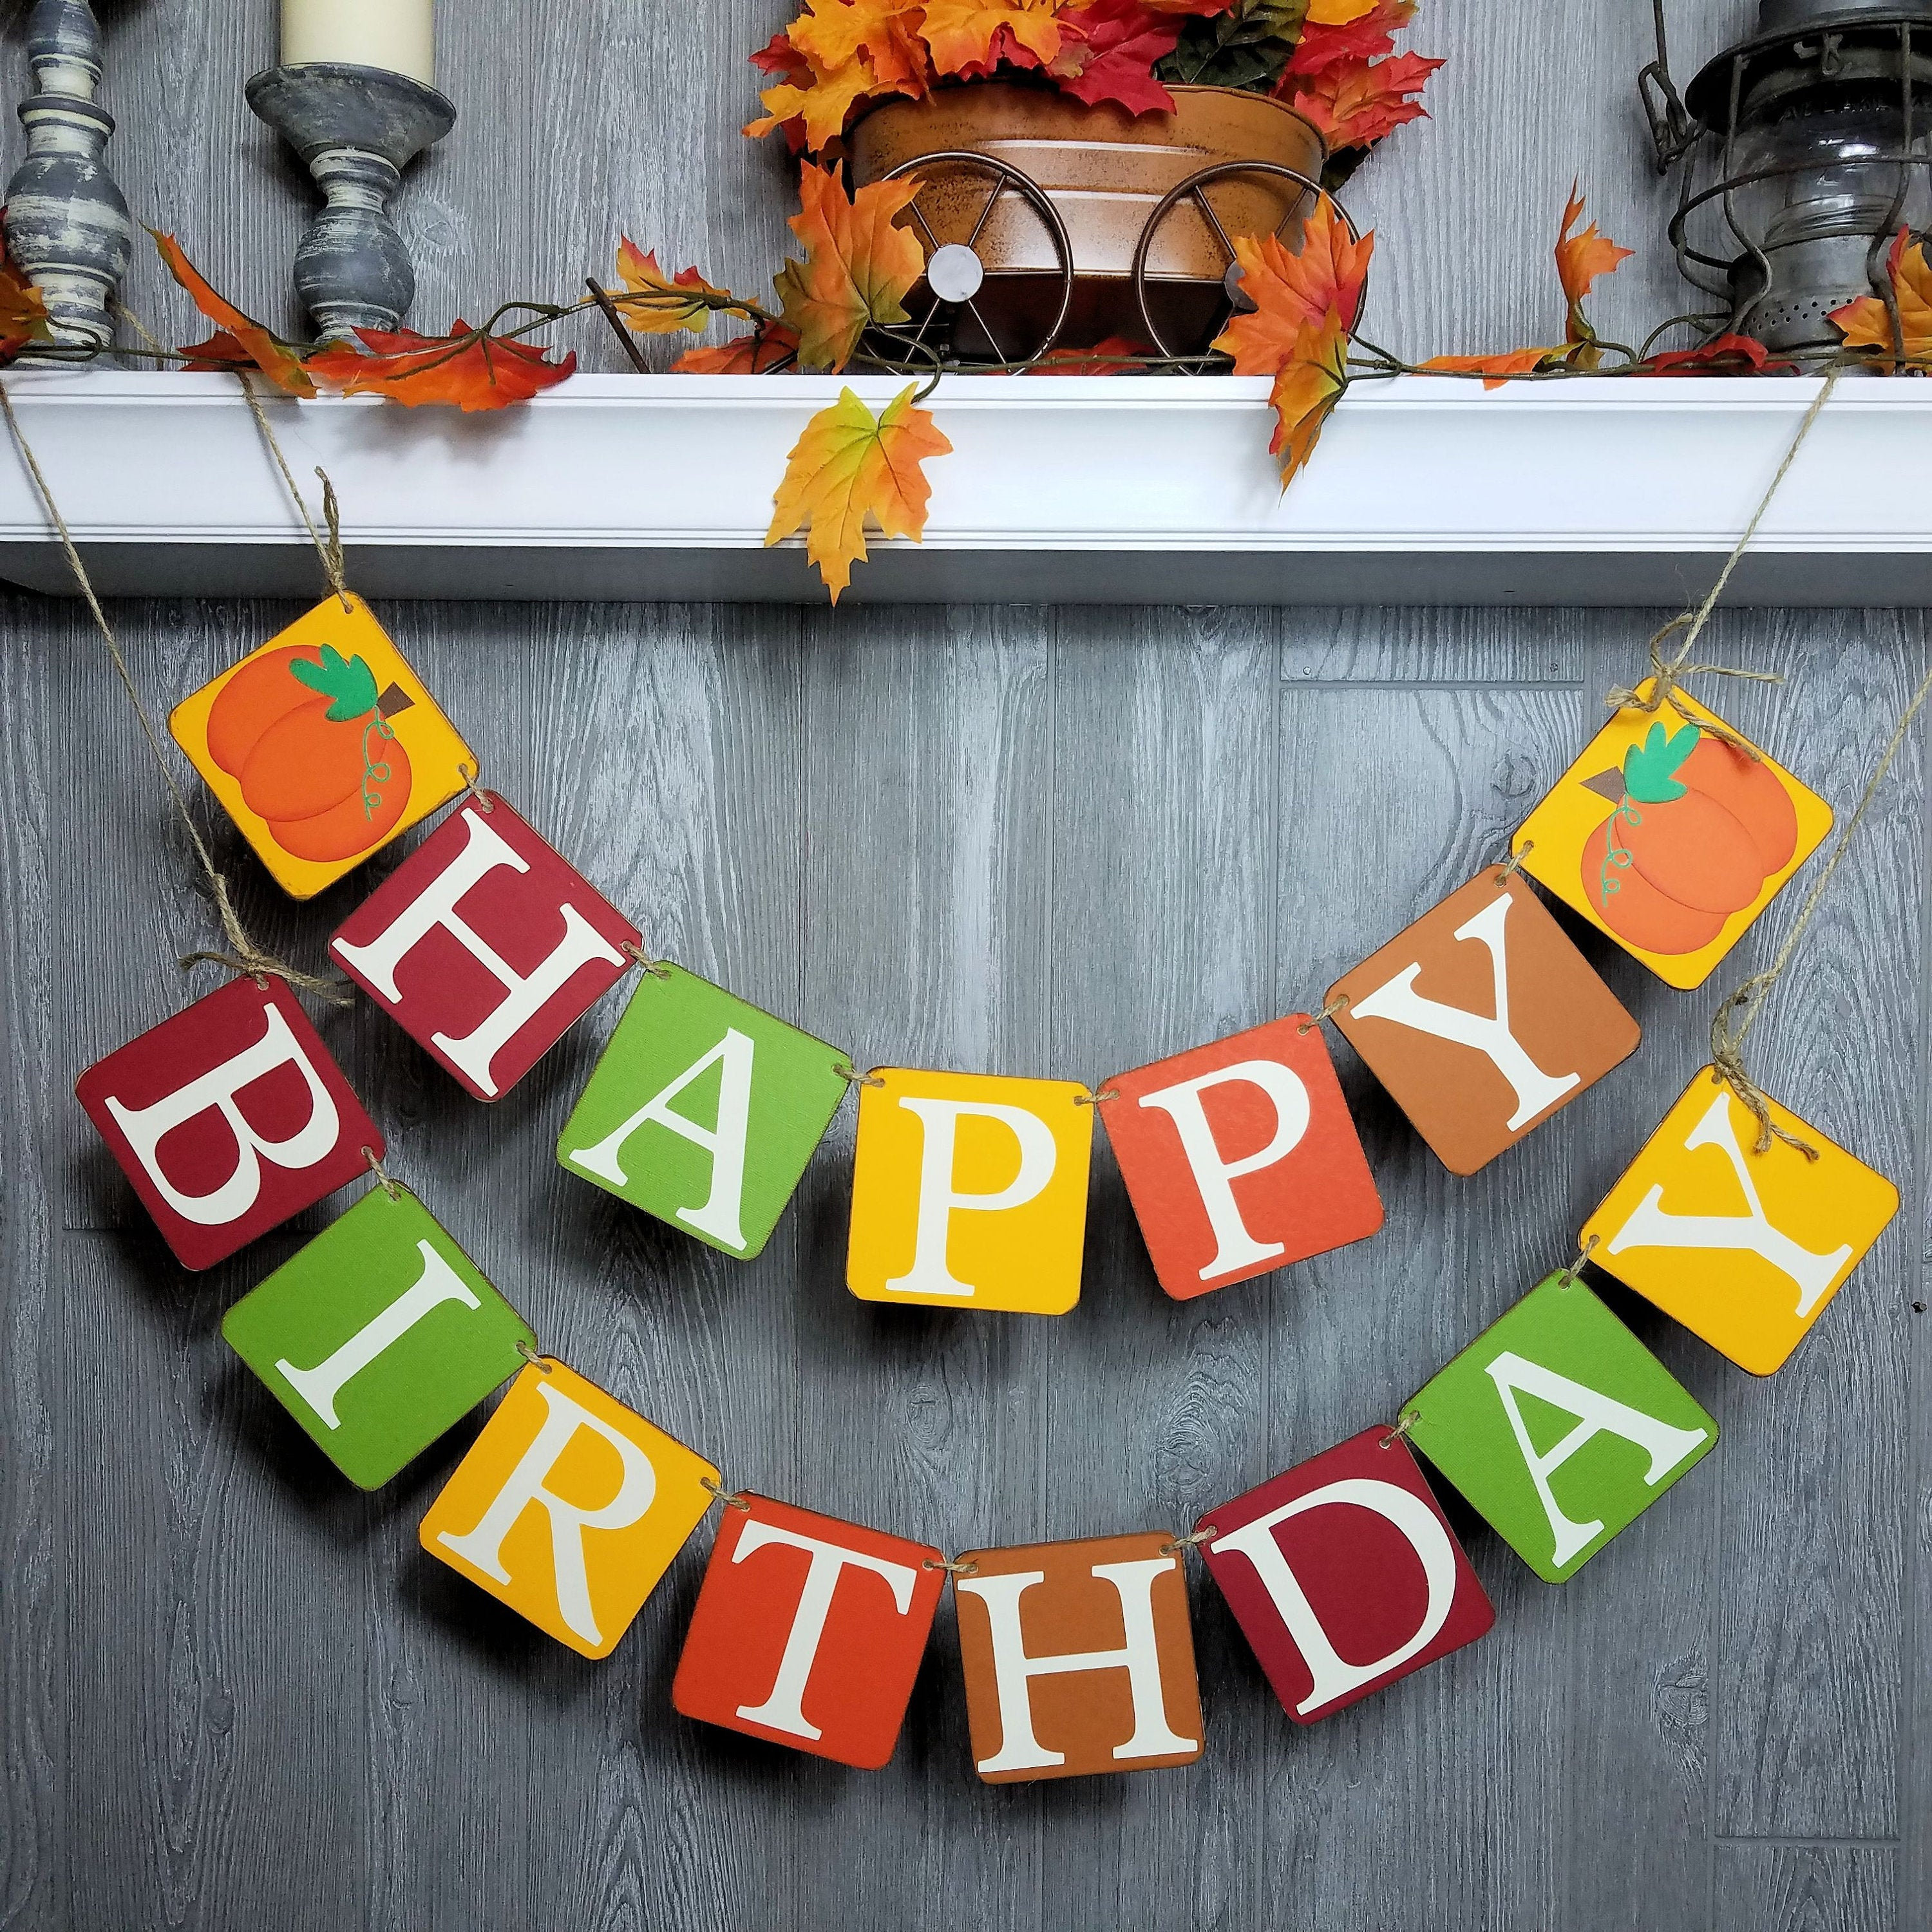 fall birthday images